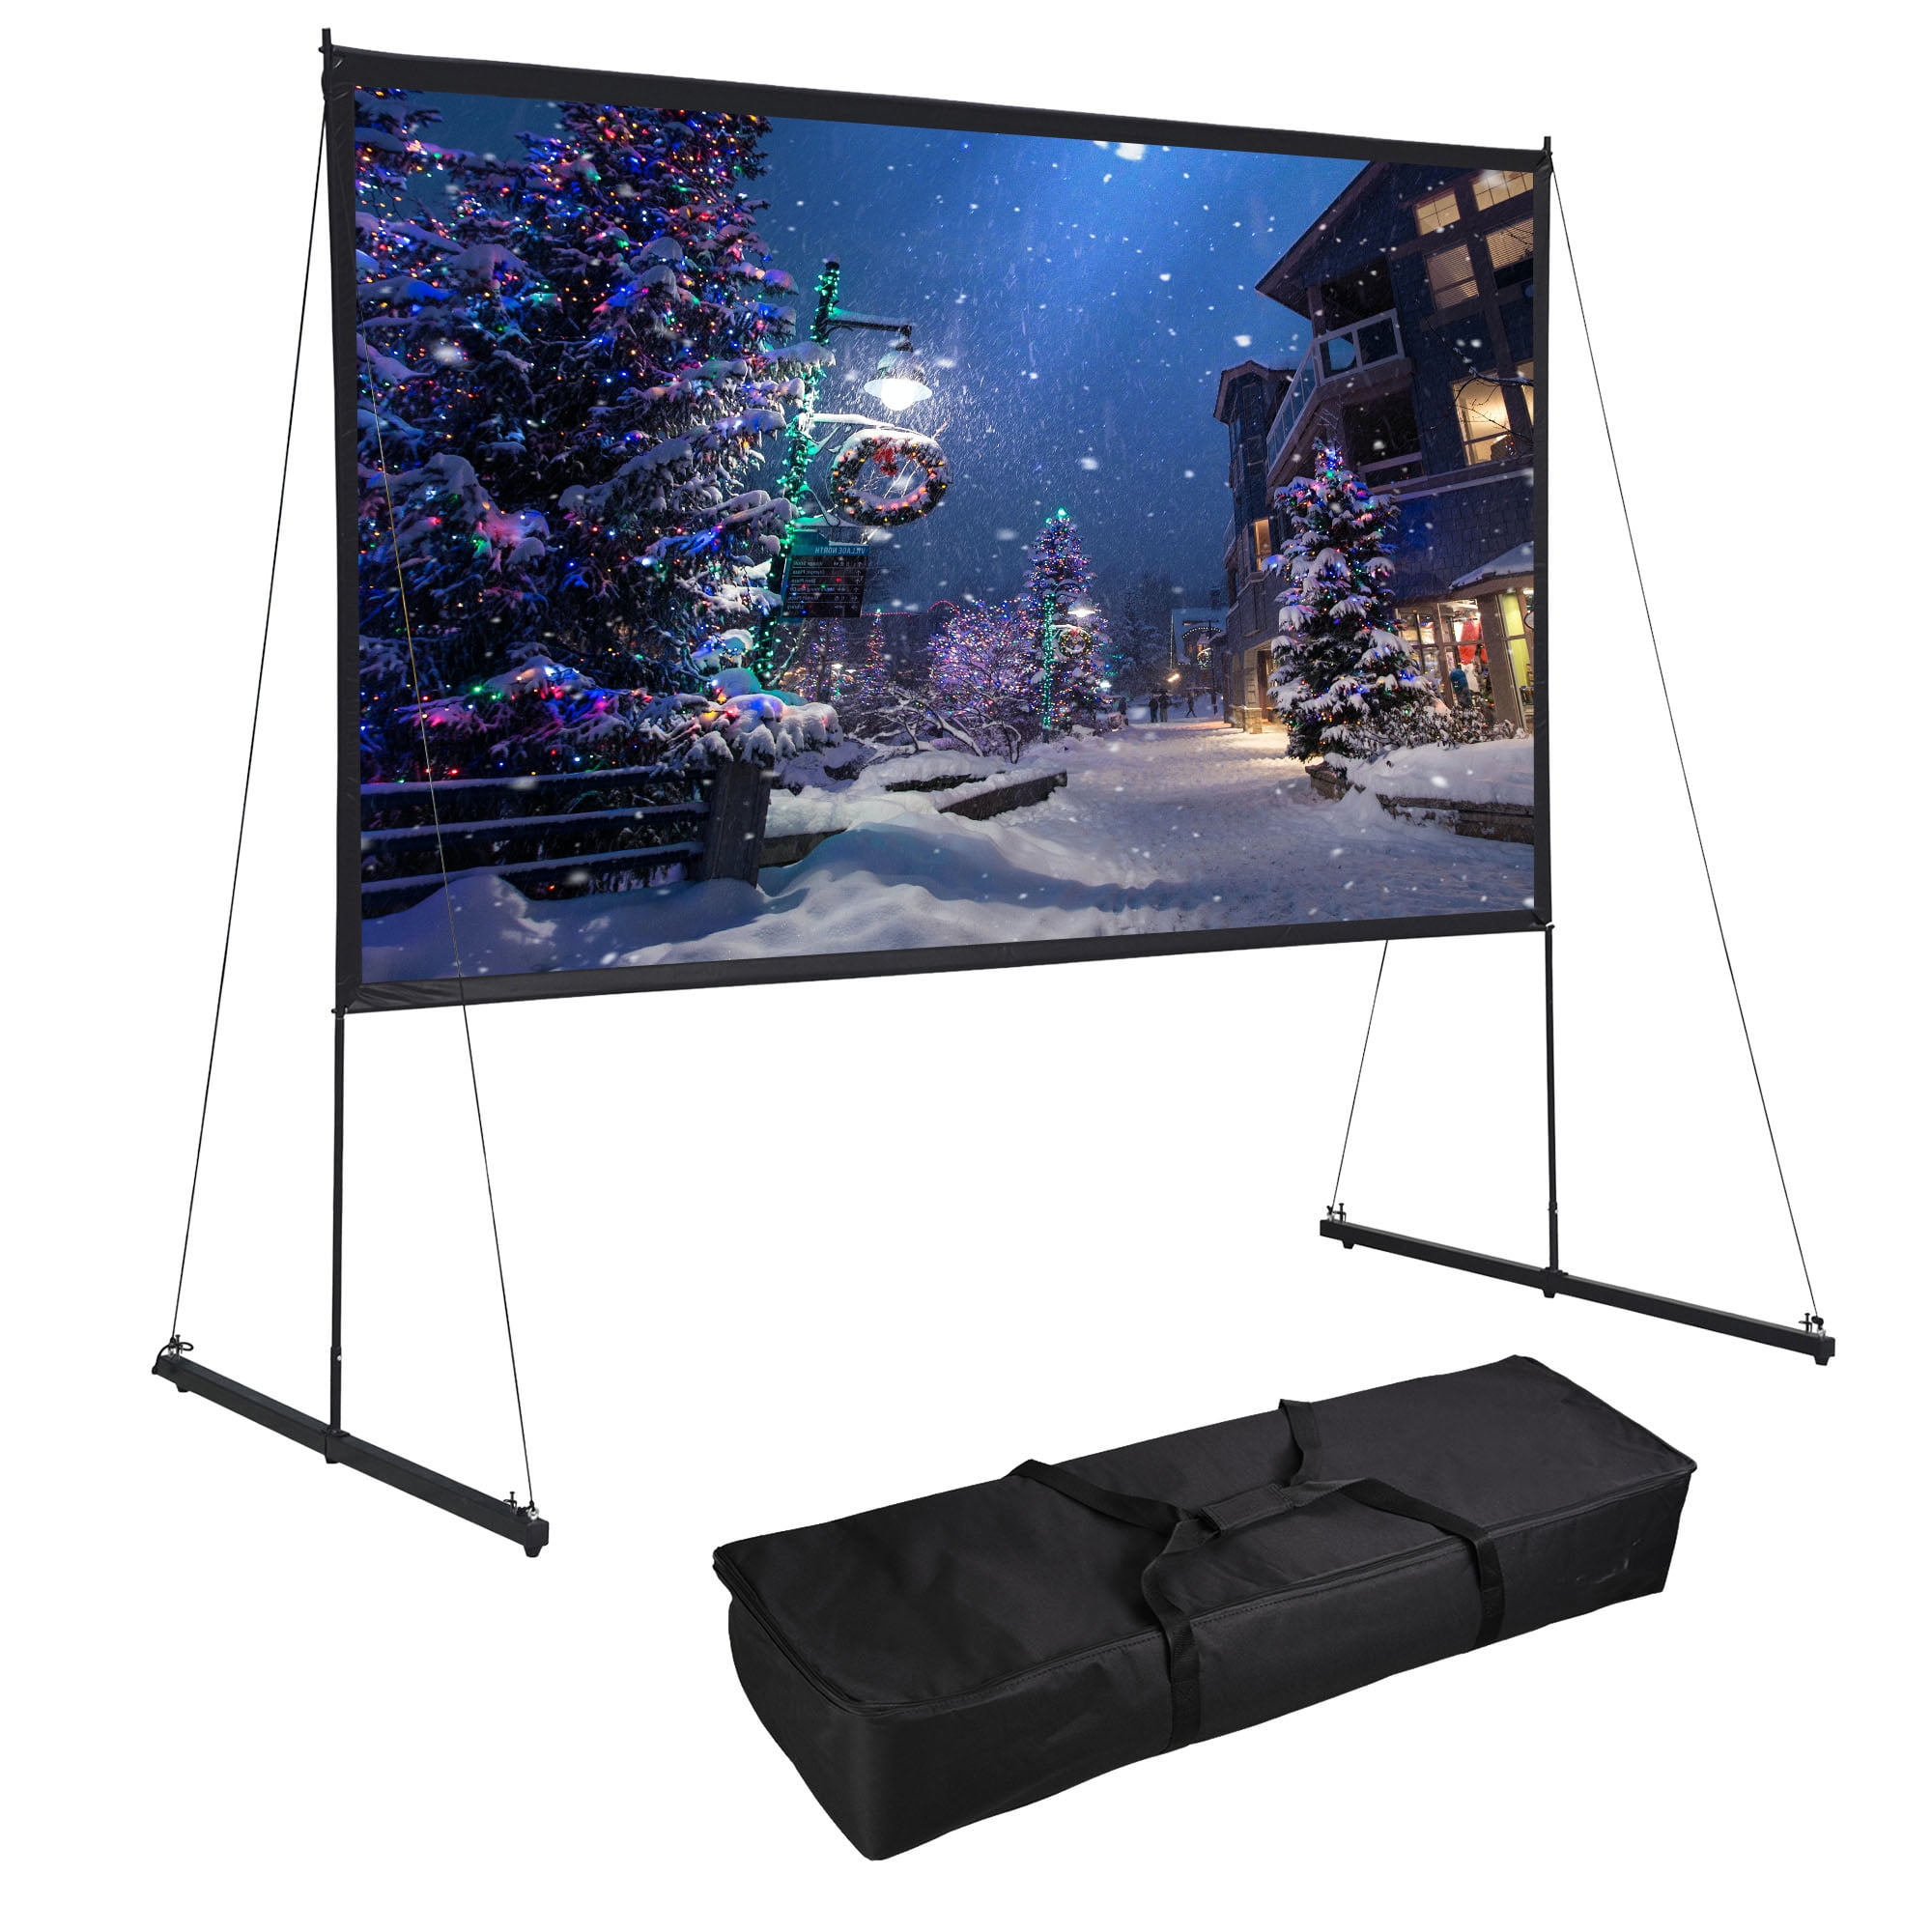 Projector Screen with Stand 150 inch Outdoor Movie Screen,16:9 Projection Screen Outdoor Portable Projector Screen for Home Theater Backyard 